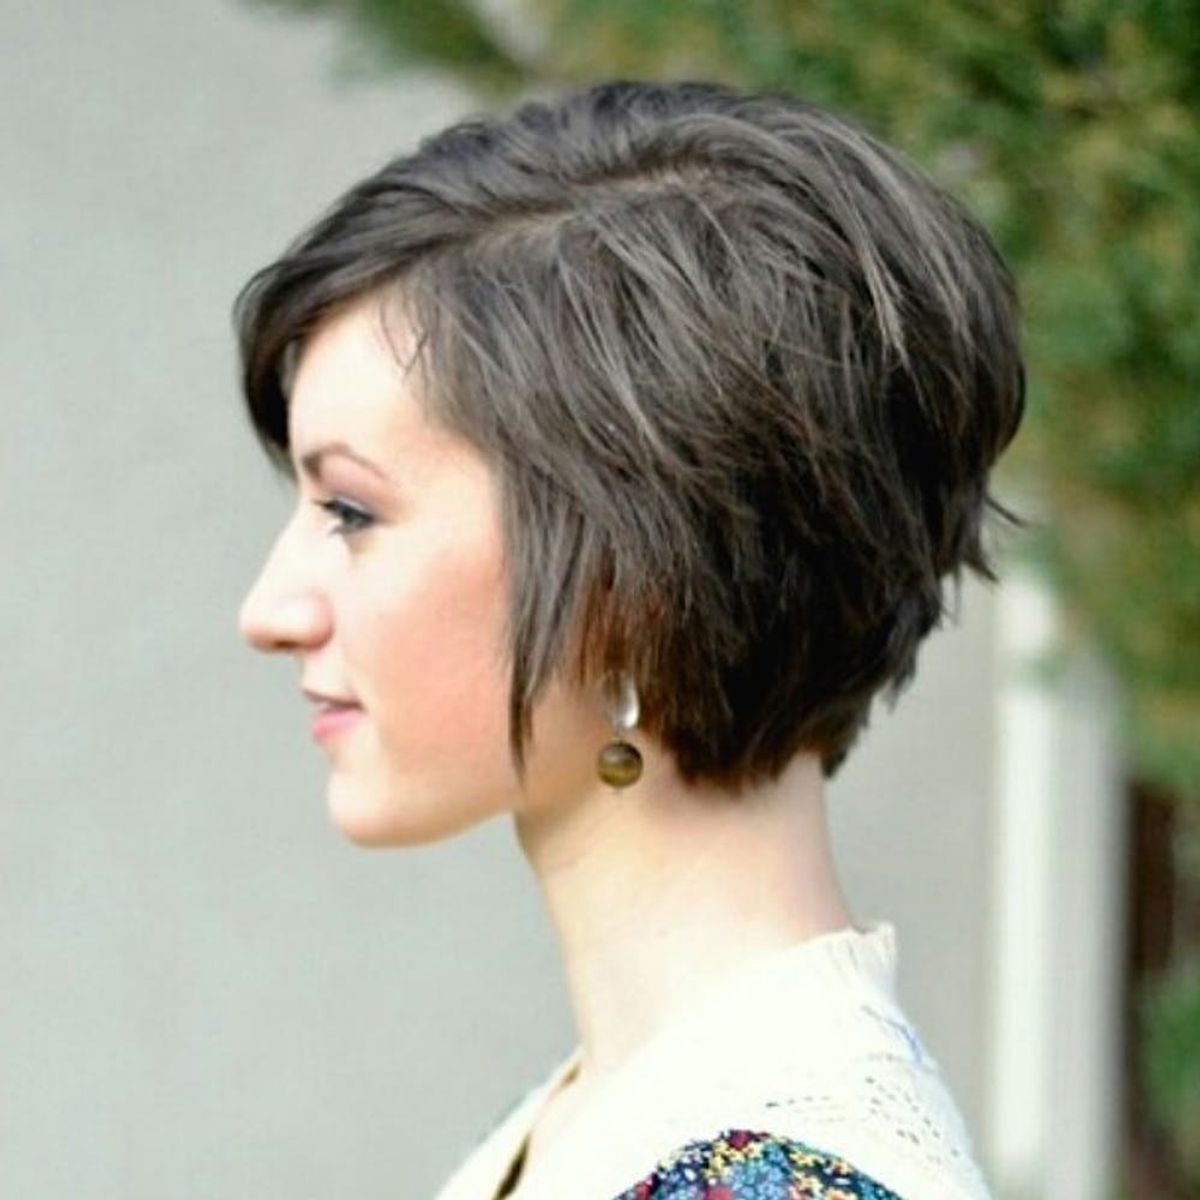 13 Styling Tips + Products for Growing Out a Pixie Cut